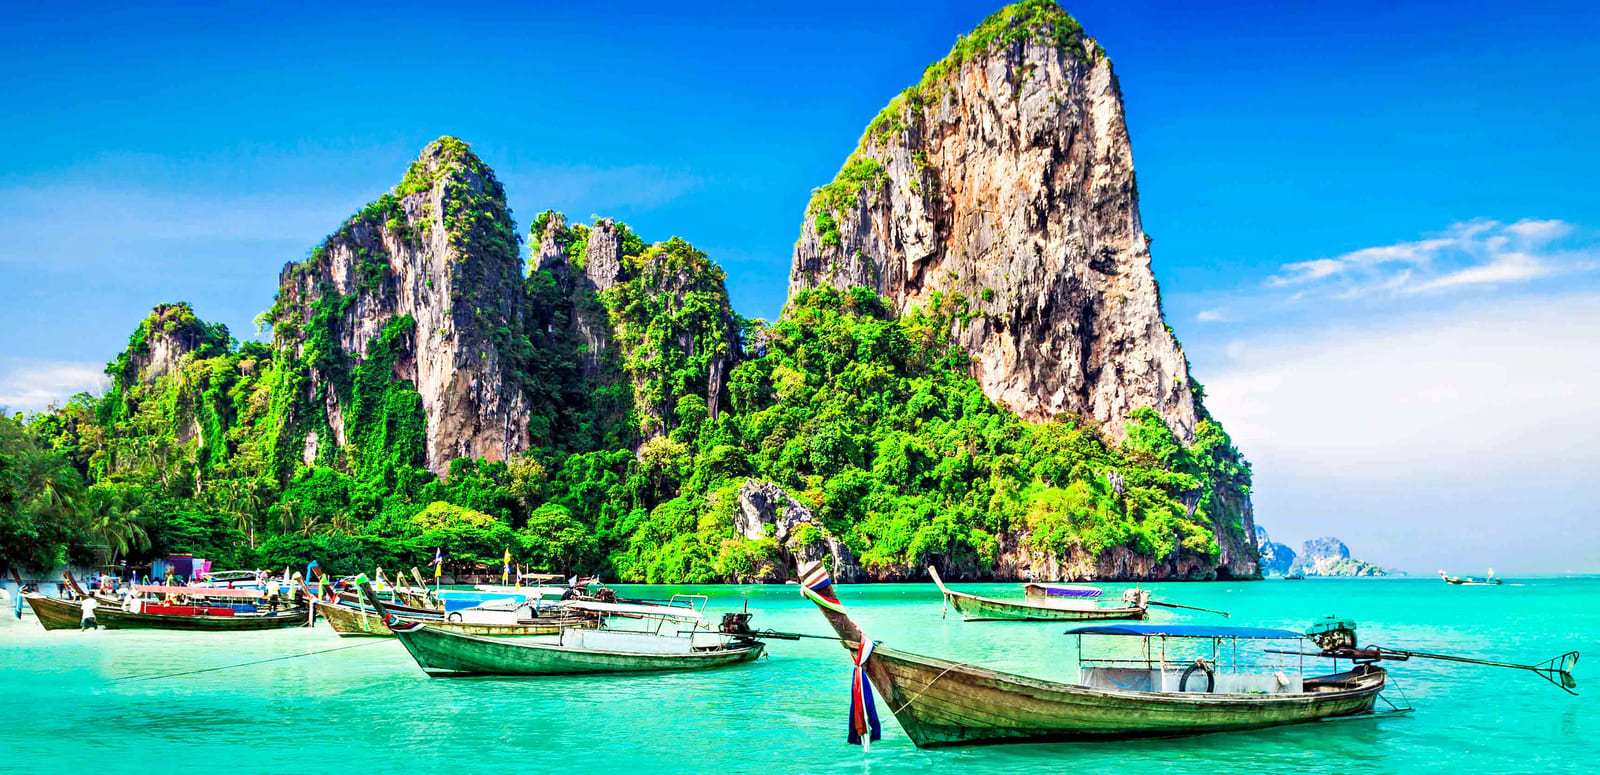 BANGKOK PATTAYA TOUR PACKAGES AT BEST PRICE FROM MEILLEUR HOLIDAYS